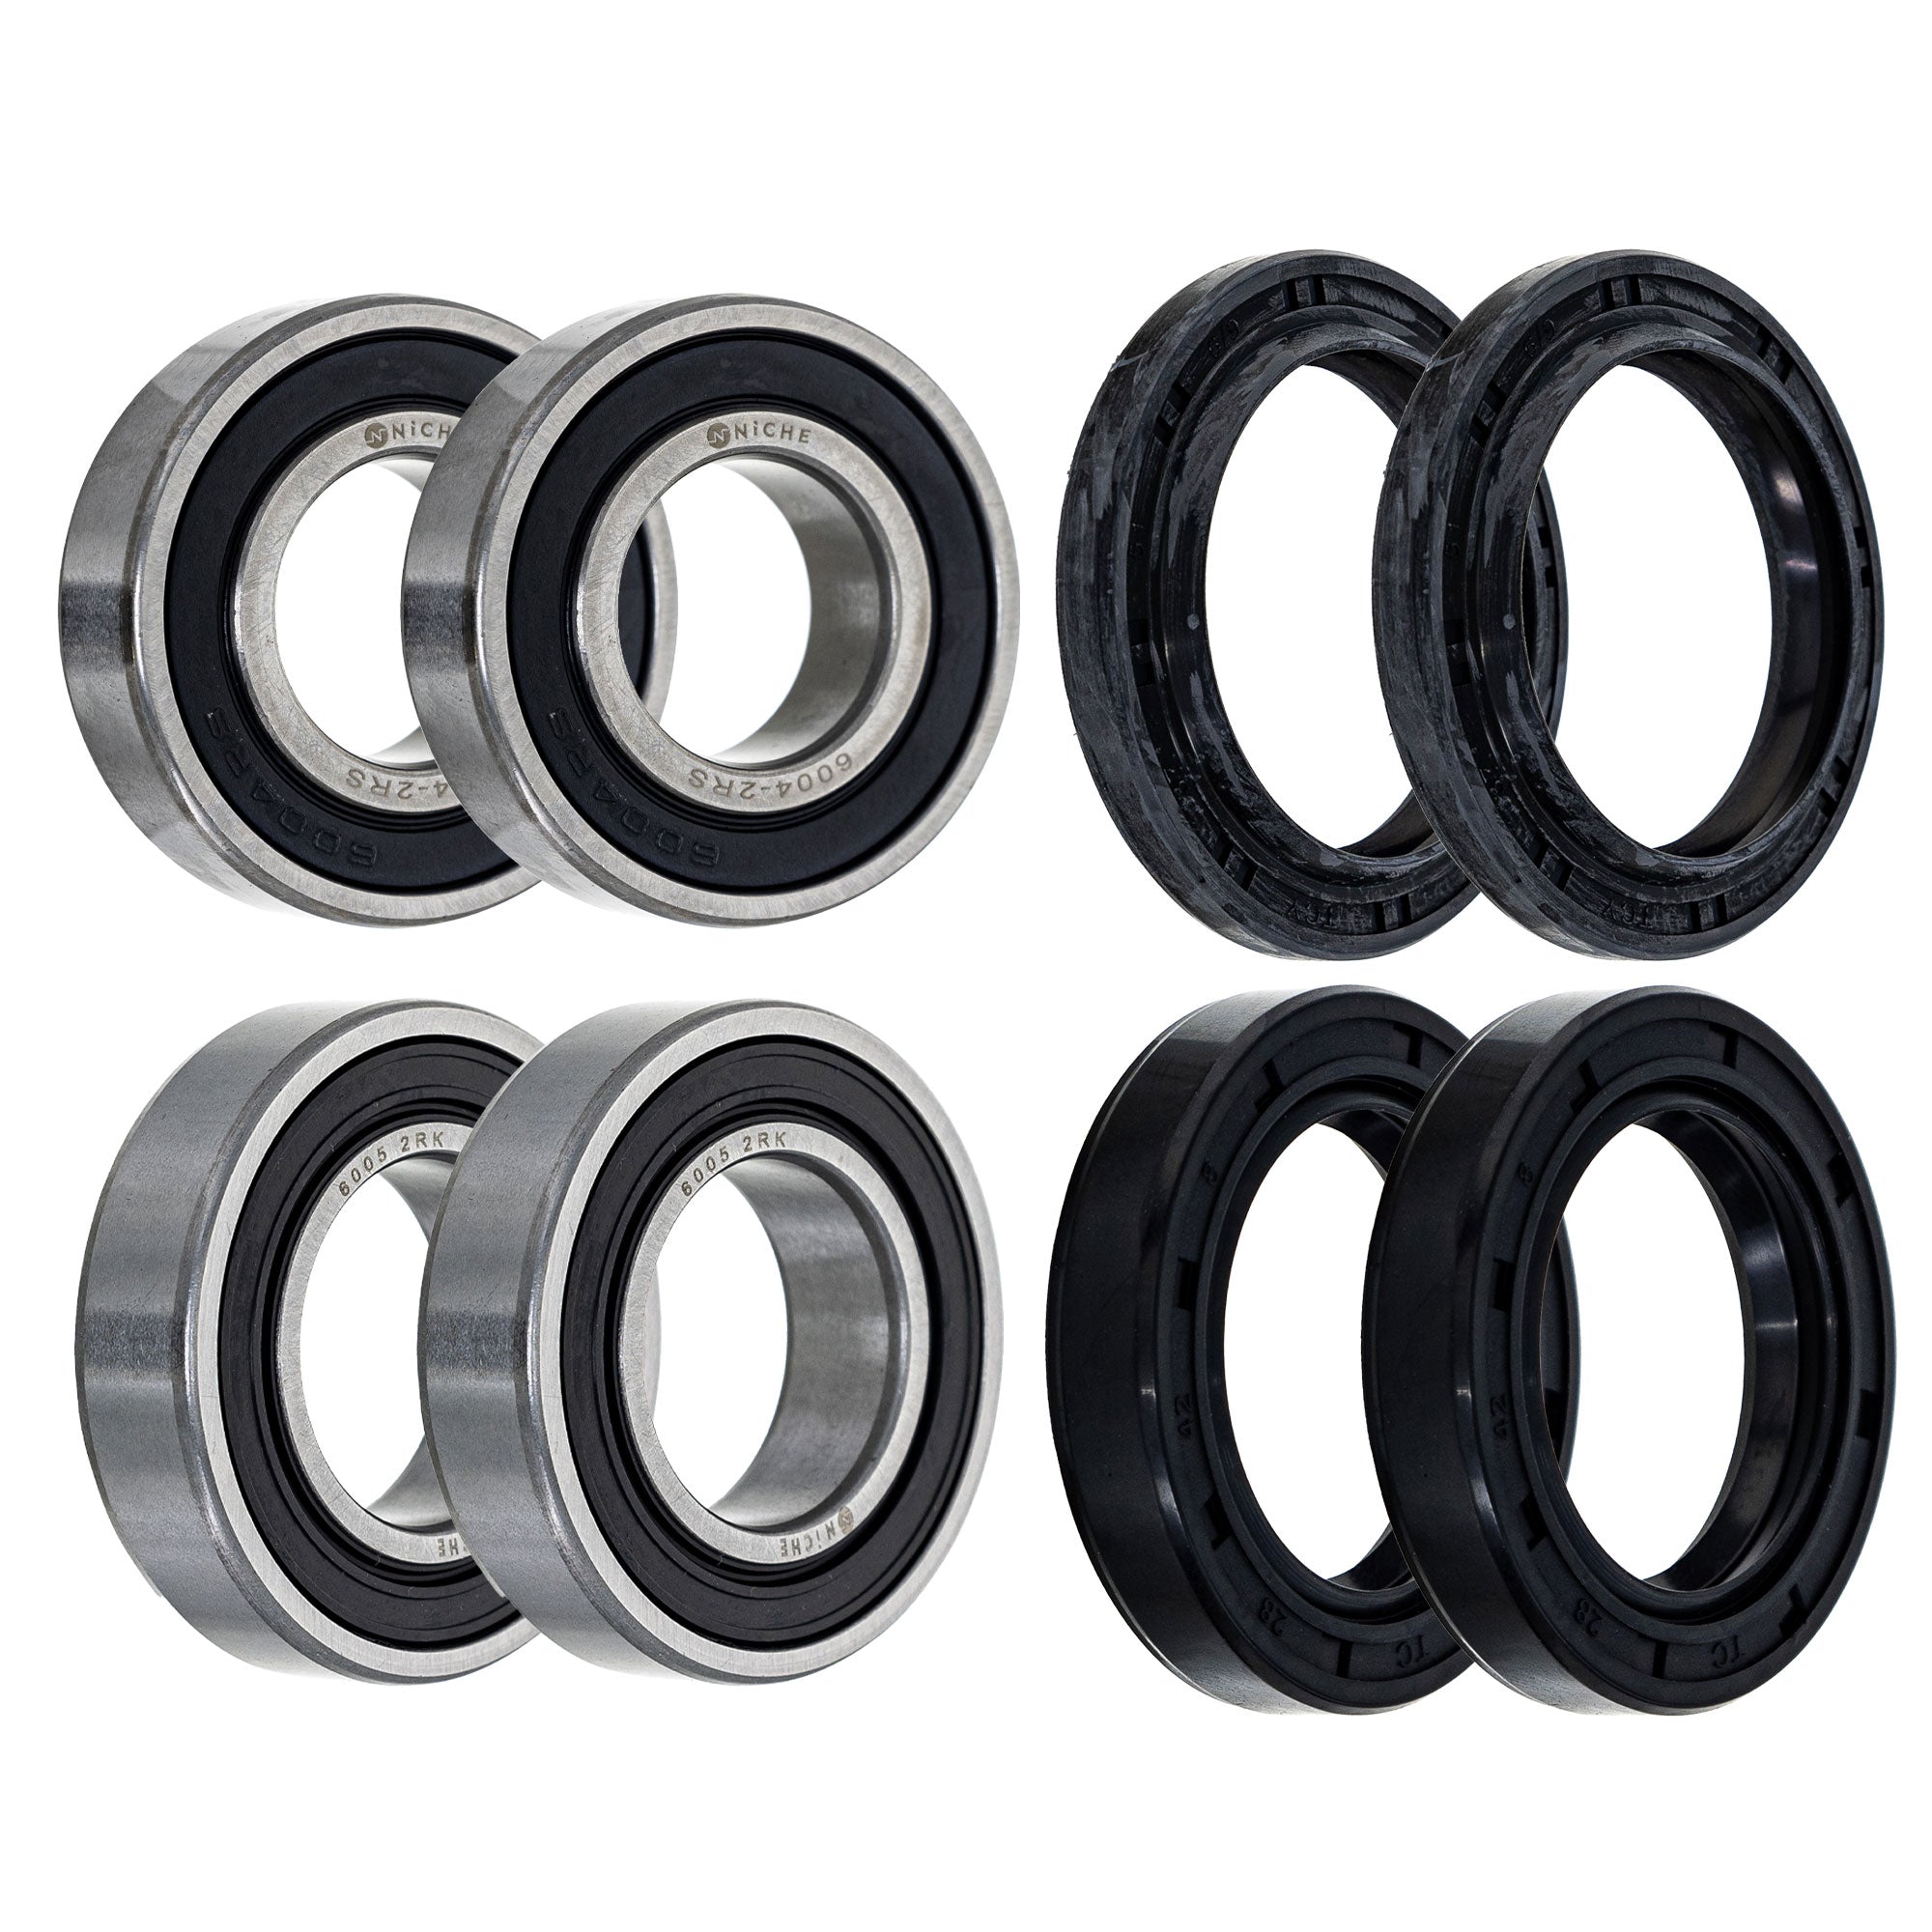 Wheel Bearing Seal Kit for zOTHER Ref No FourTrax NICHE MK1008261